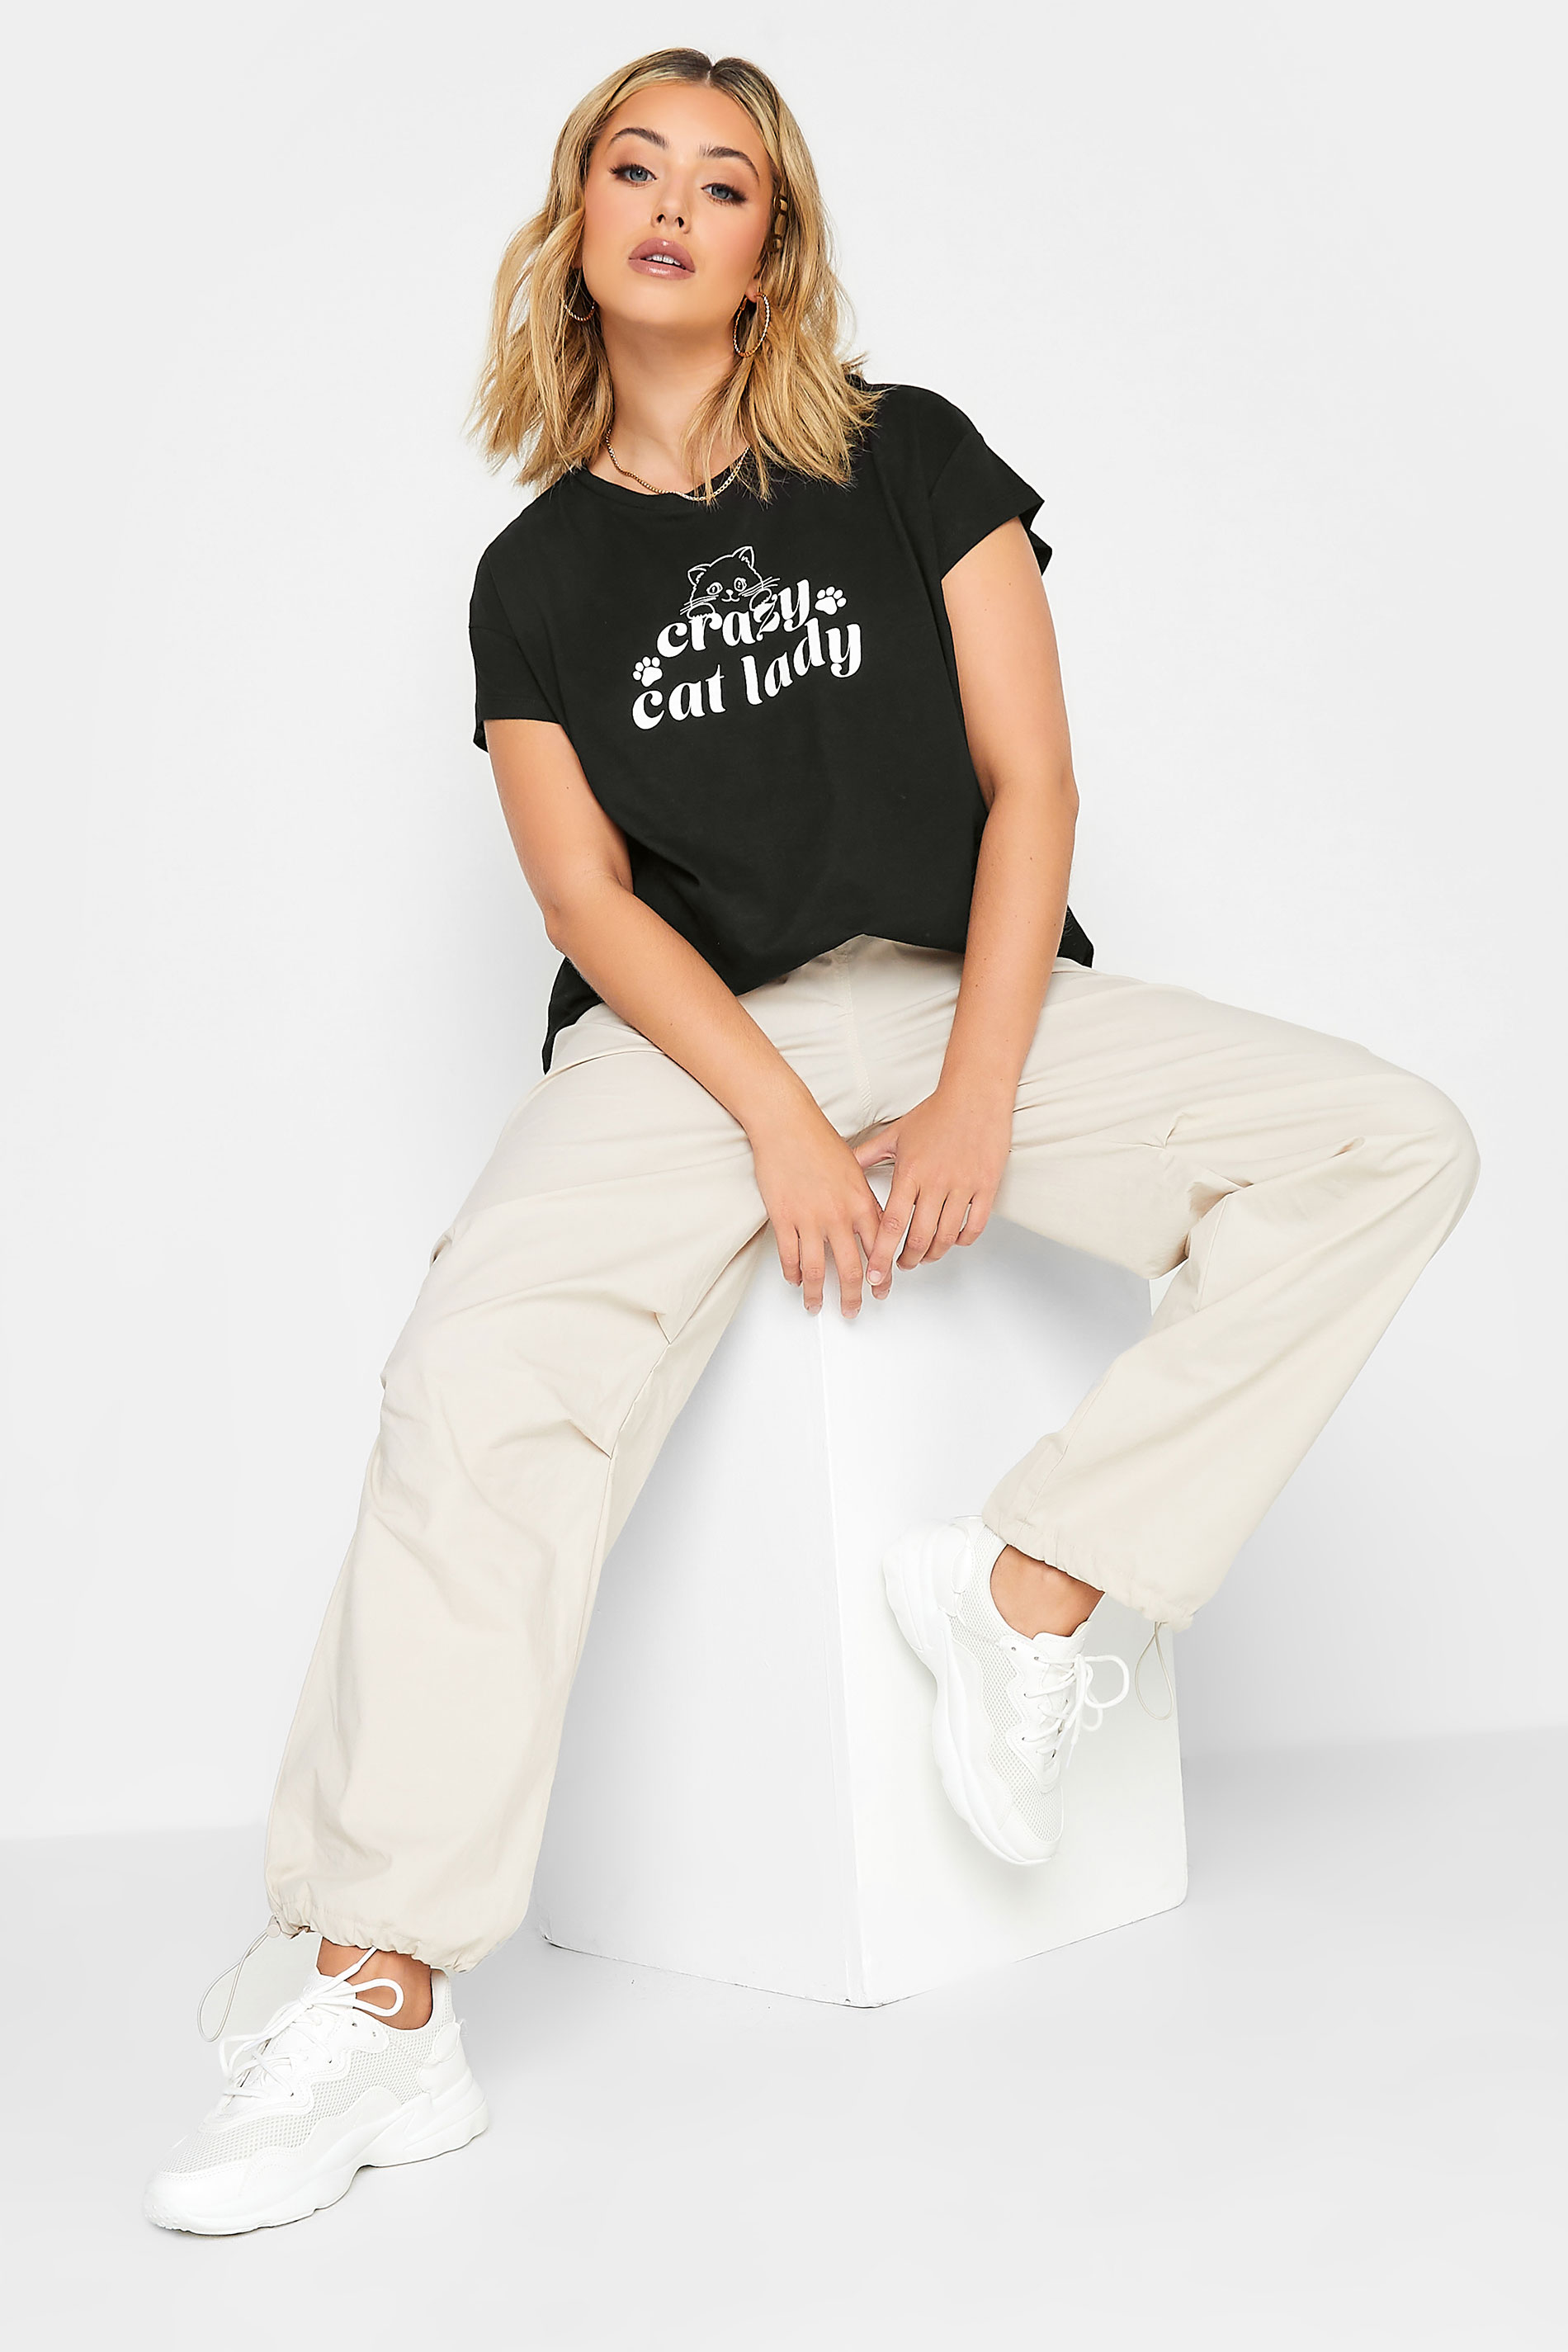 LIMITED COLLECTION Plus Size Black 'Crazy Cat Lady' Slogan T-Shirt | Yours Clothing 3